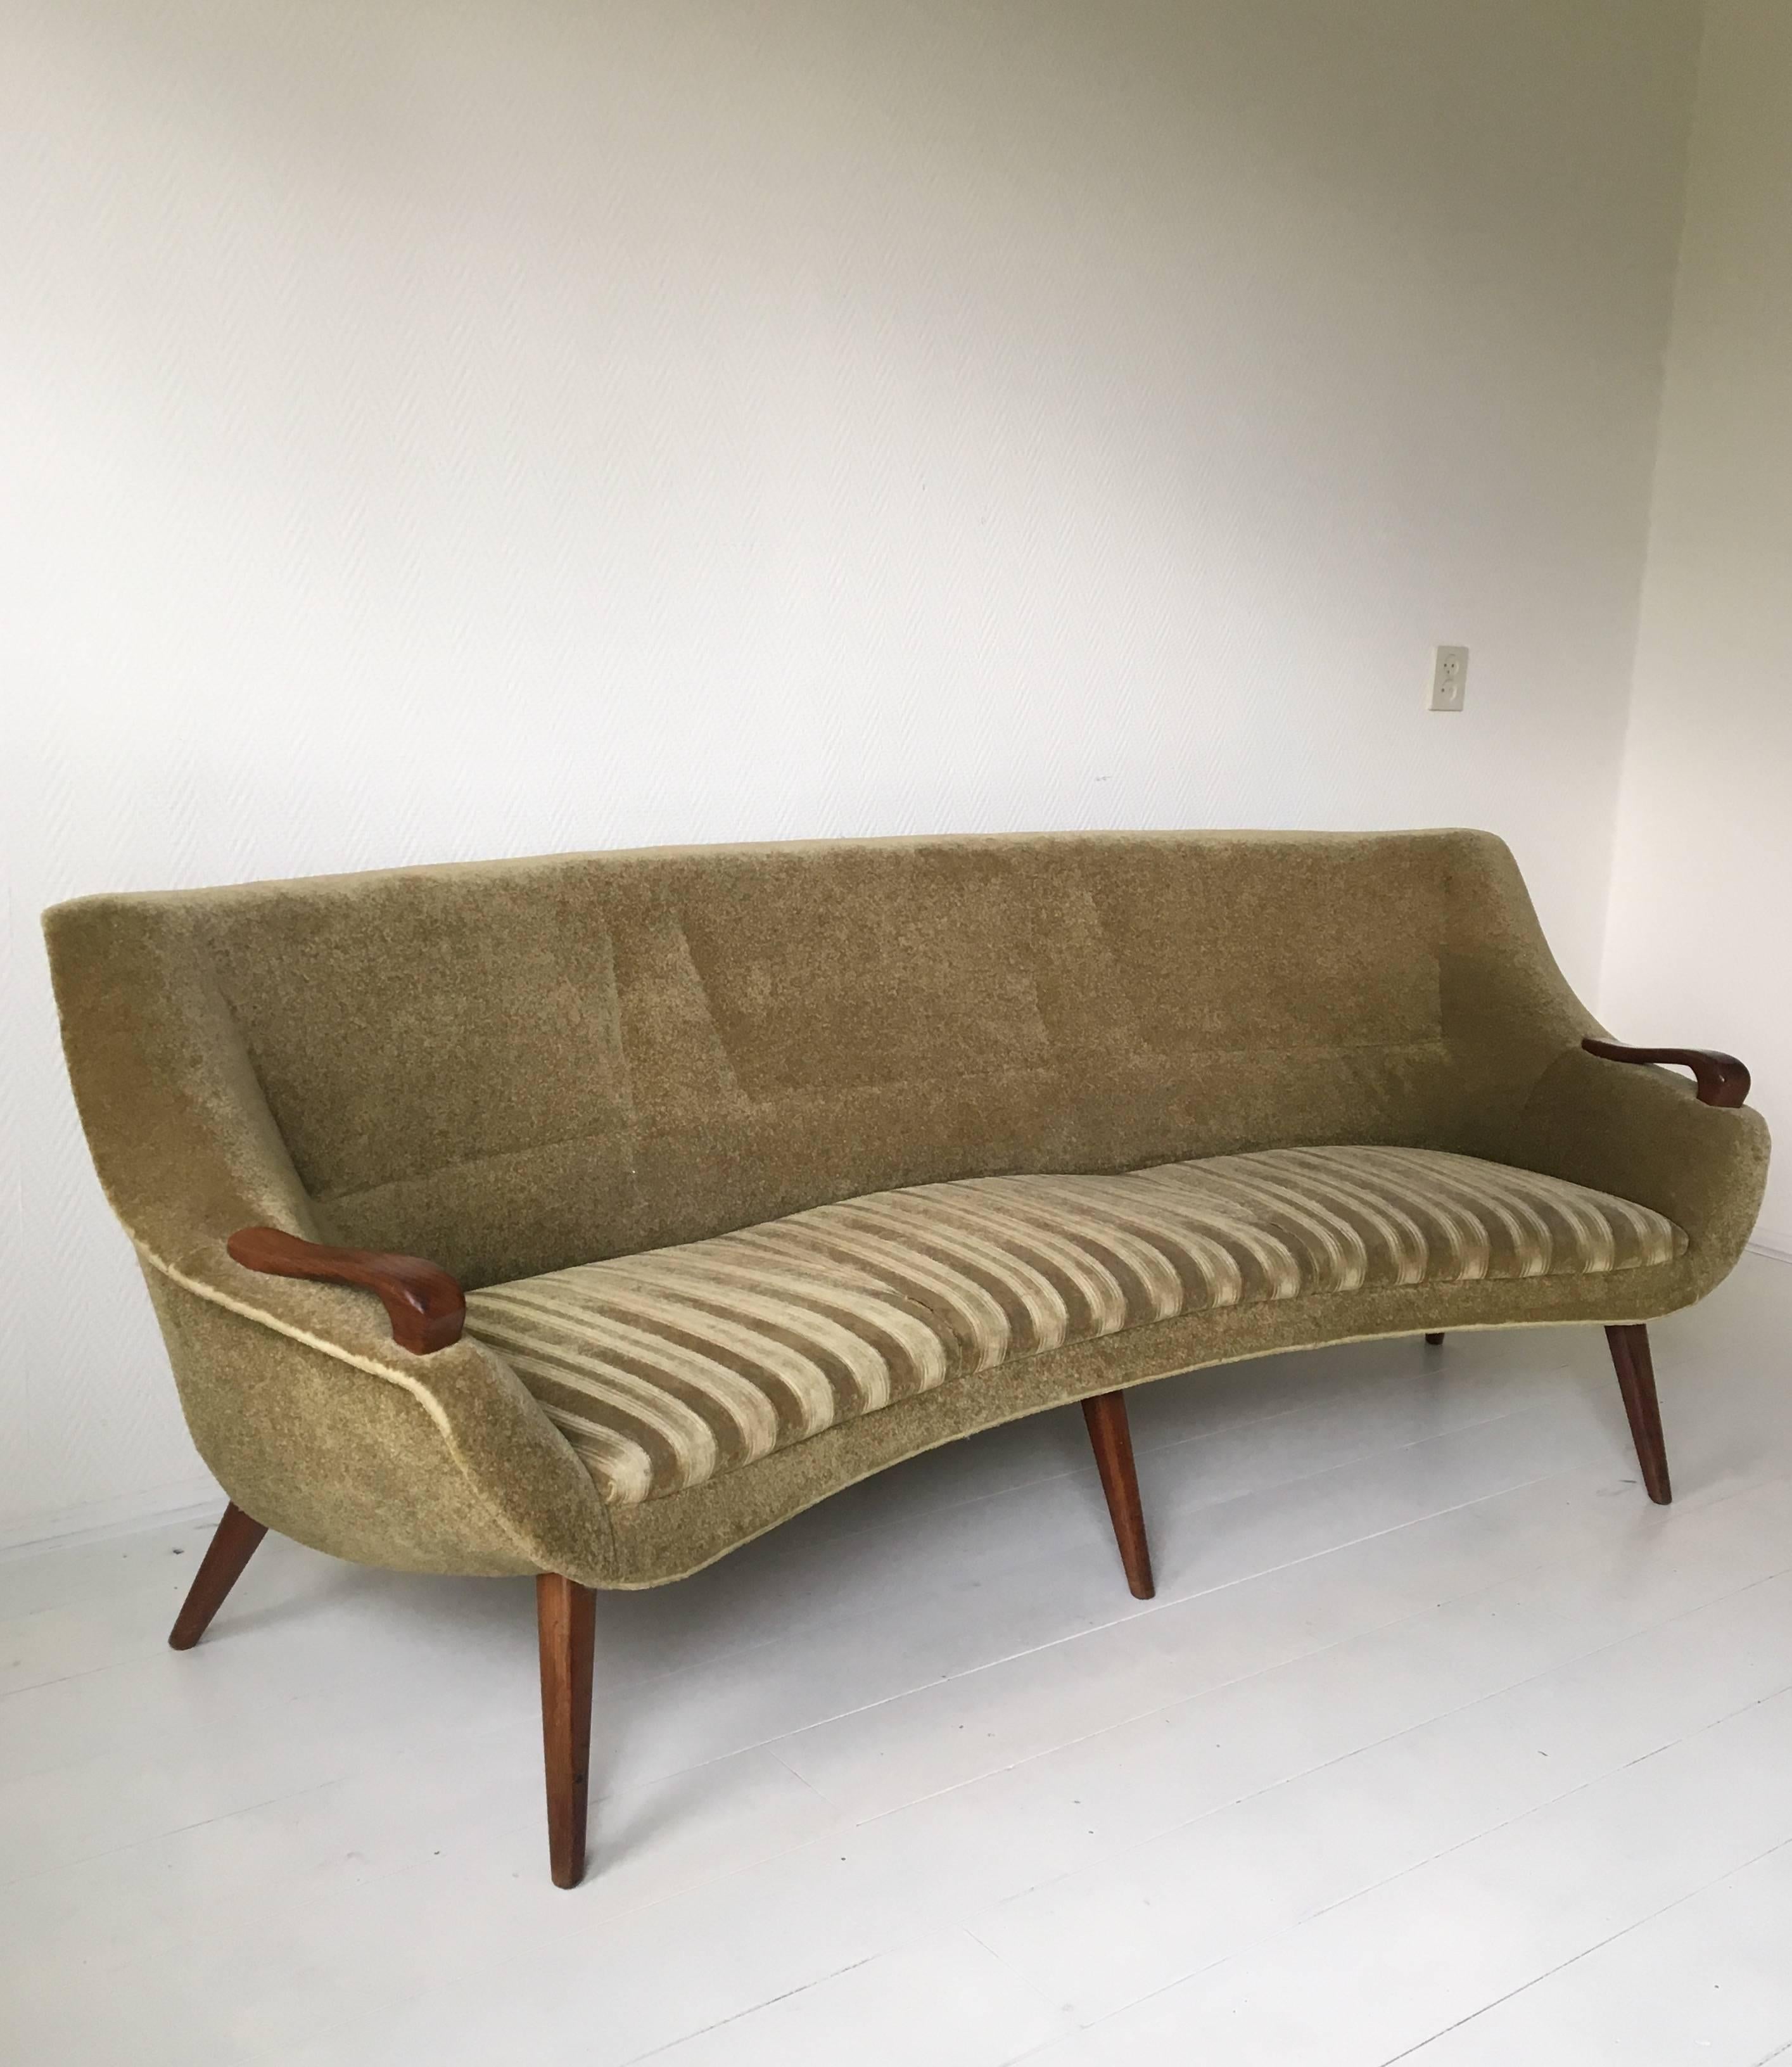 Super elegant sofa set, designed and manufactured in Europe. The set features green Velours fabric and wonderful teak handles and feet. The sofa is slightly curved. However this set is in sturdy condition, the pieces should best be reupholstered